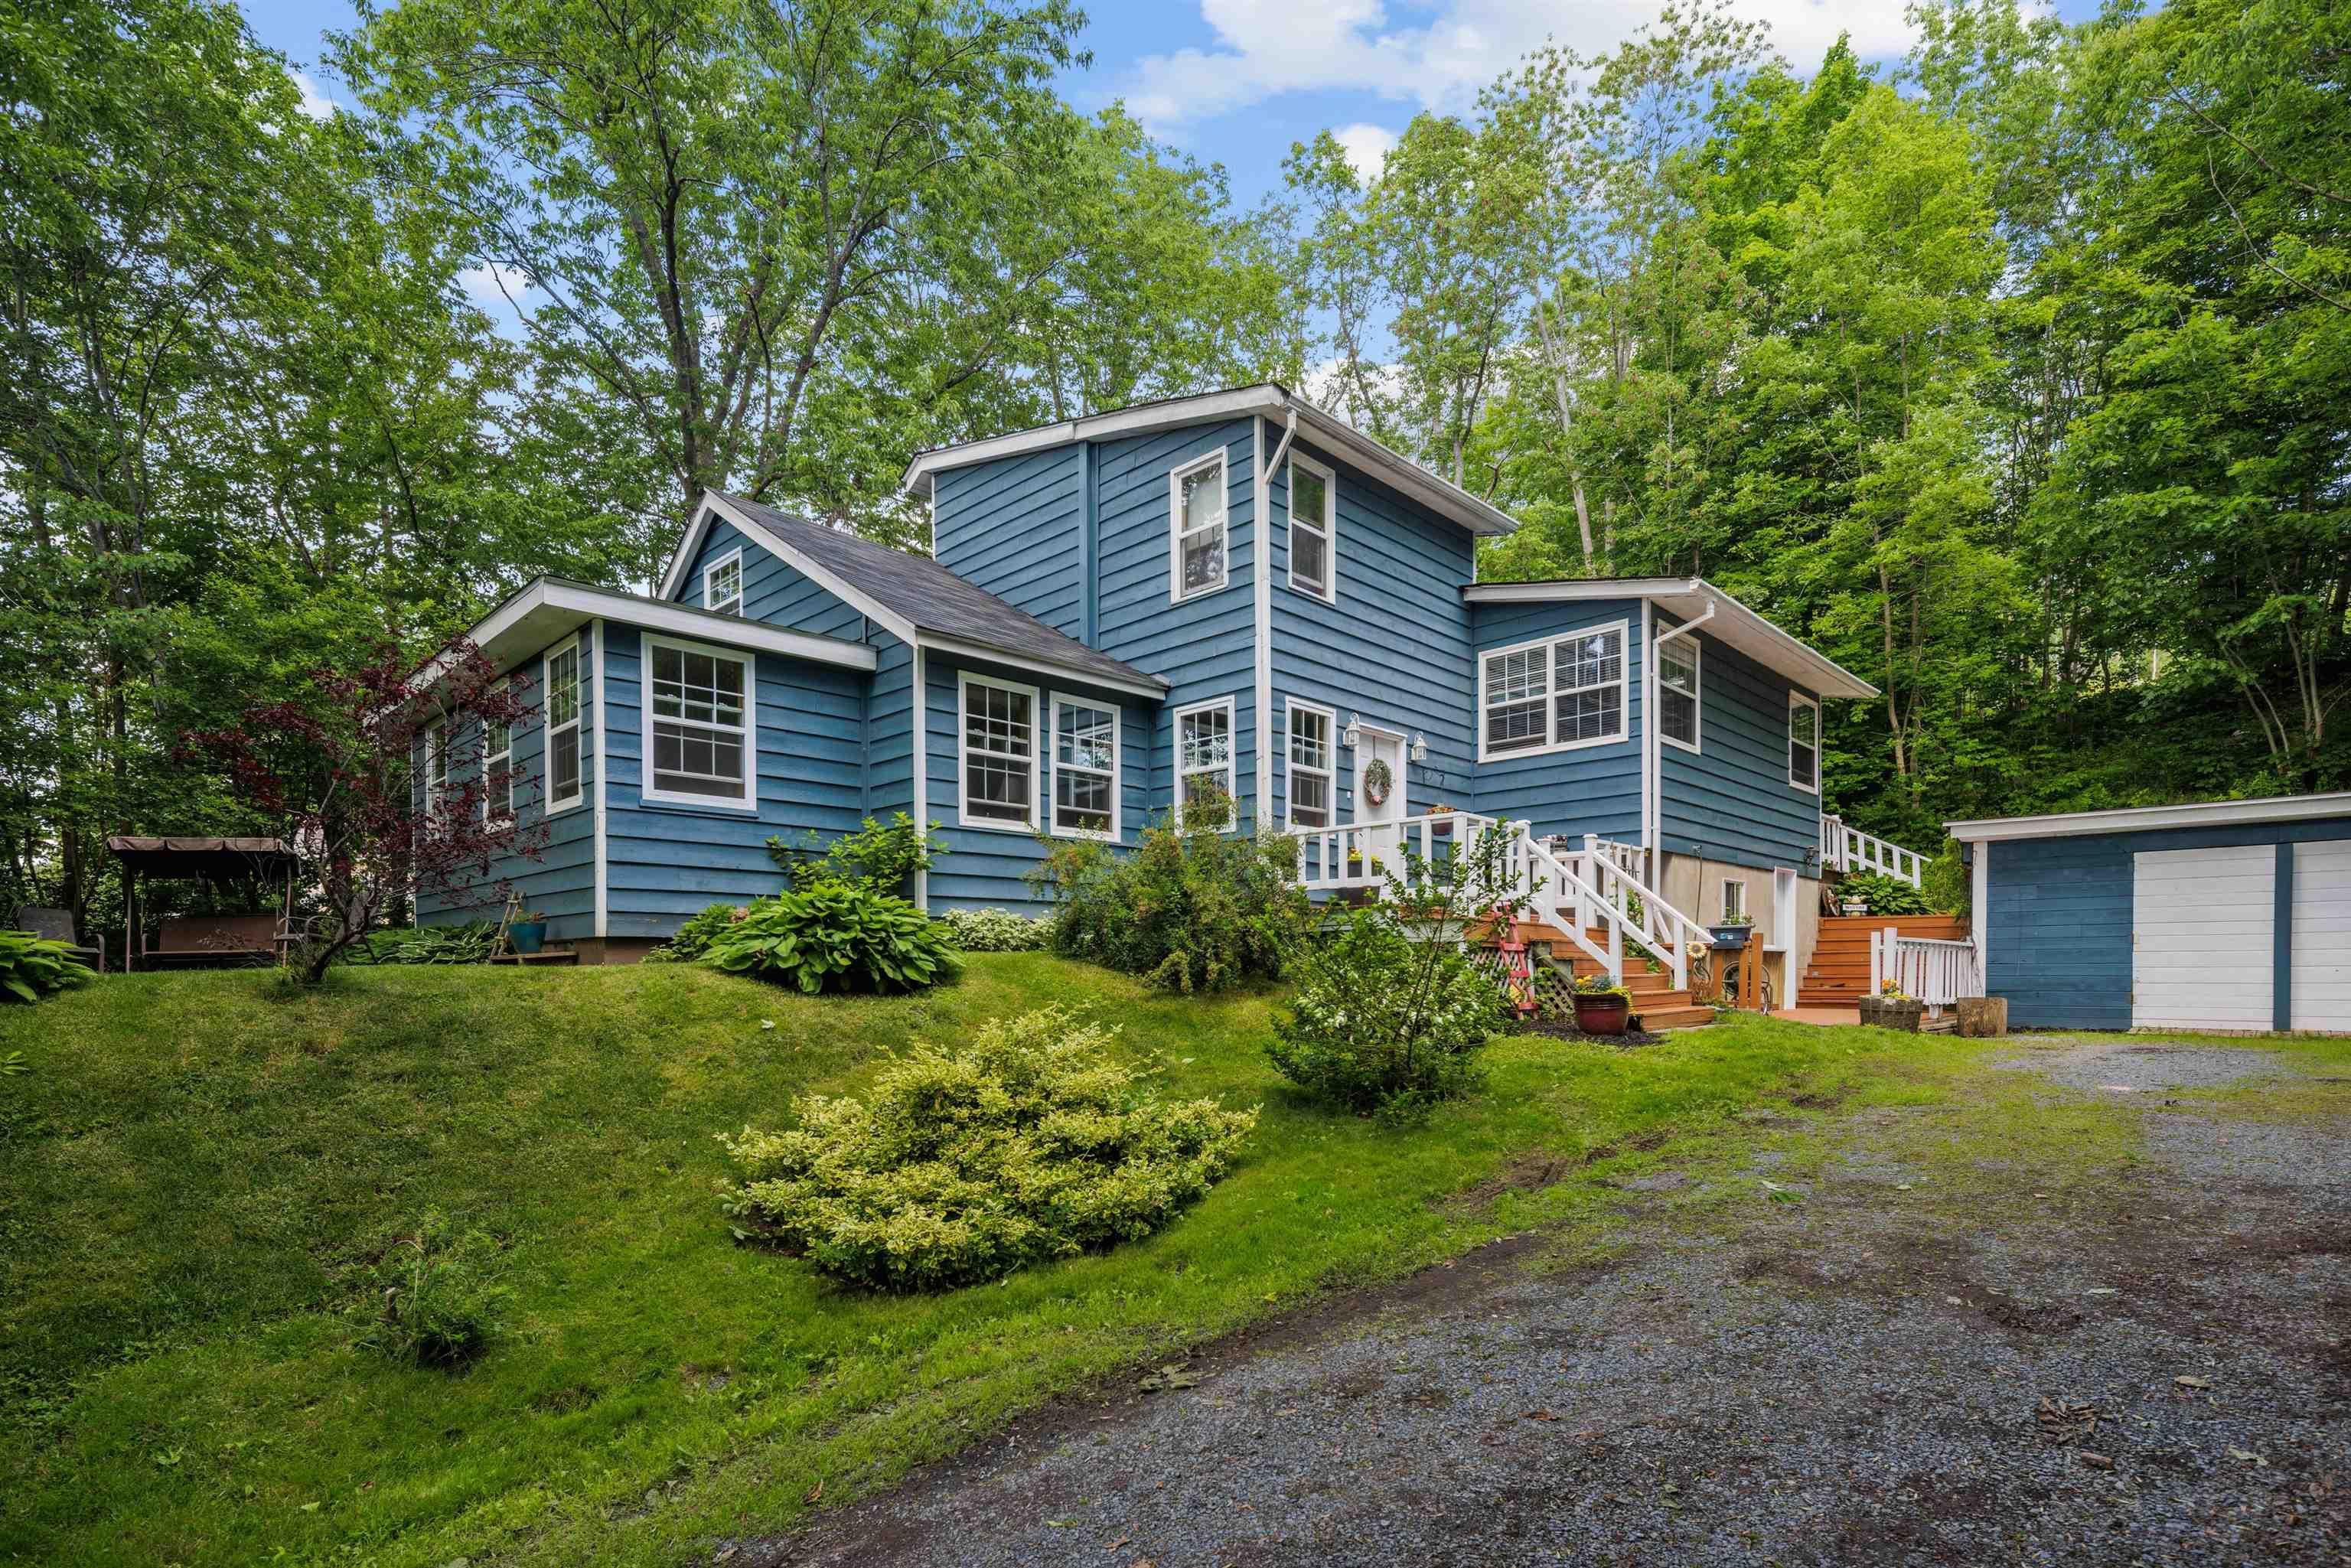 Main Photo: 2894 Highway 2 in Fall River: 30-Waverley, Fall River, Oakfiel Residential for sale (Halifax-Dartmouth)  : MLS®# 202216097